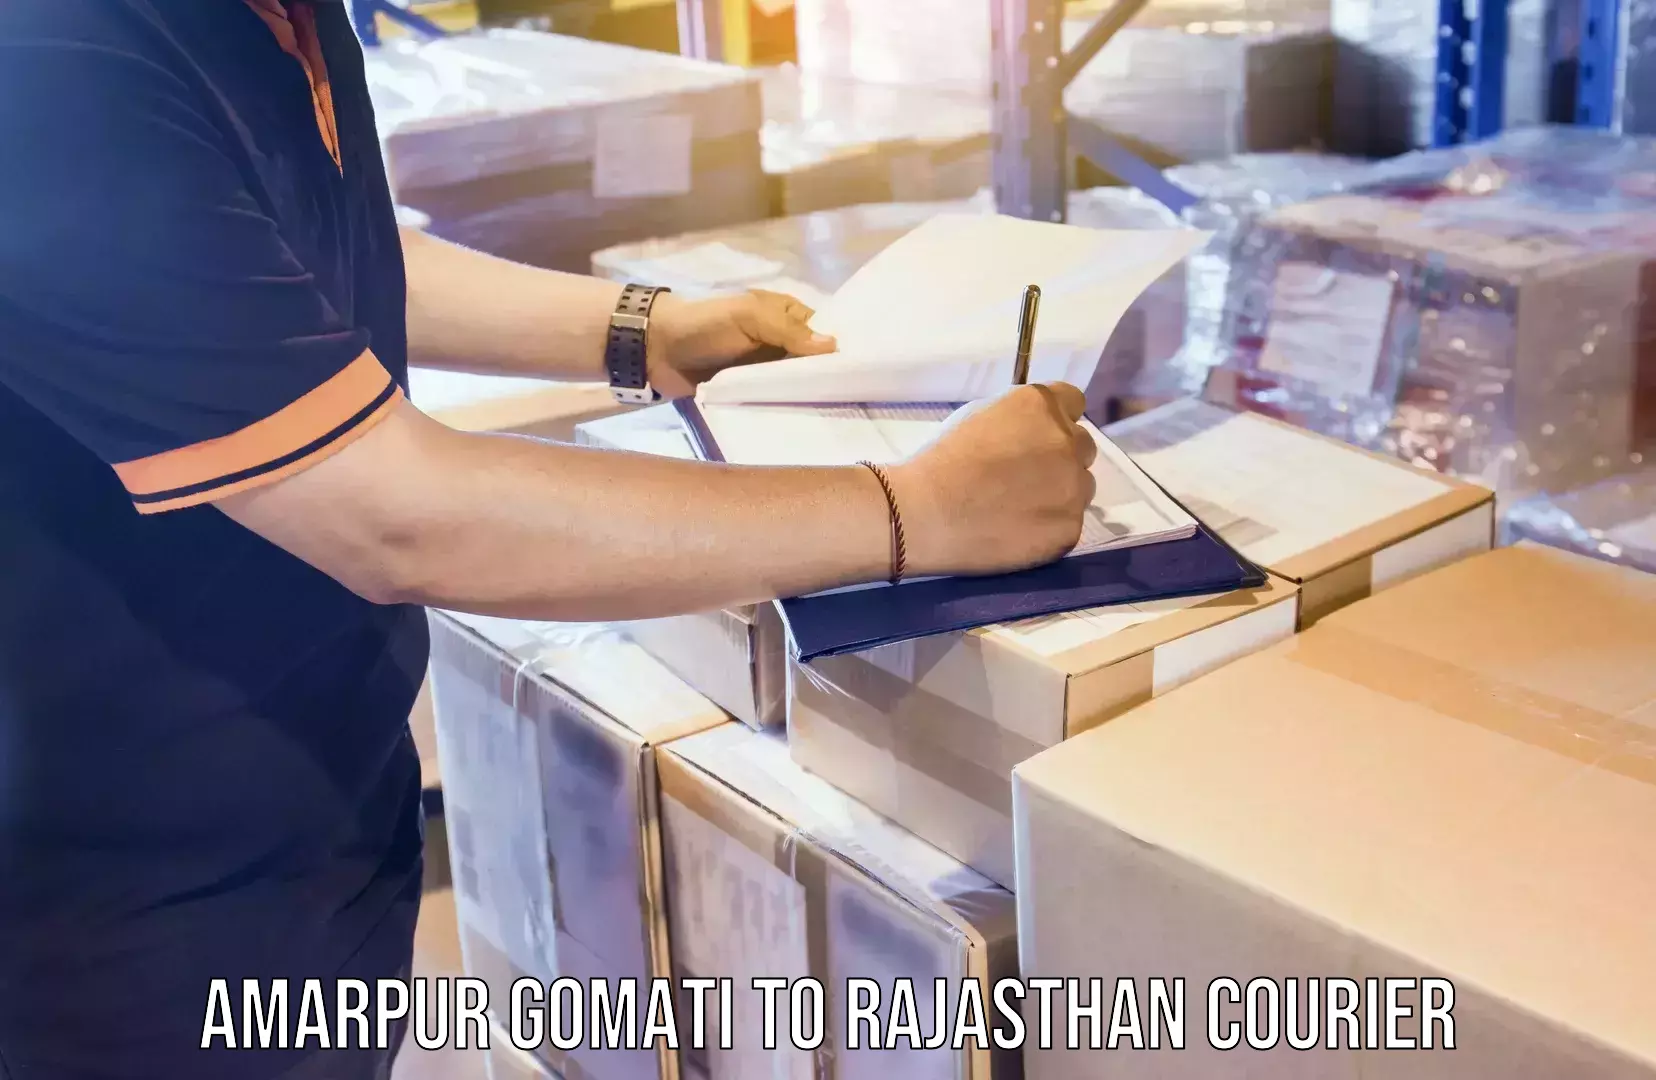 Express delivery network in Amarpur Gomati to Rajasthan